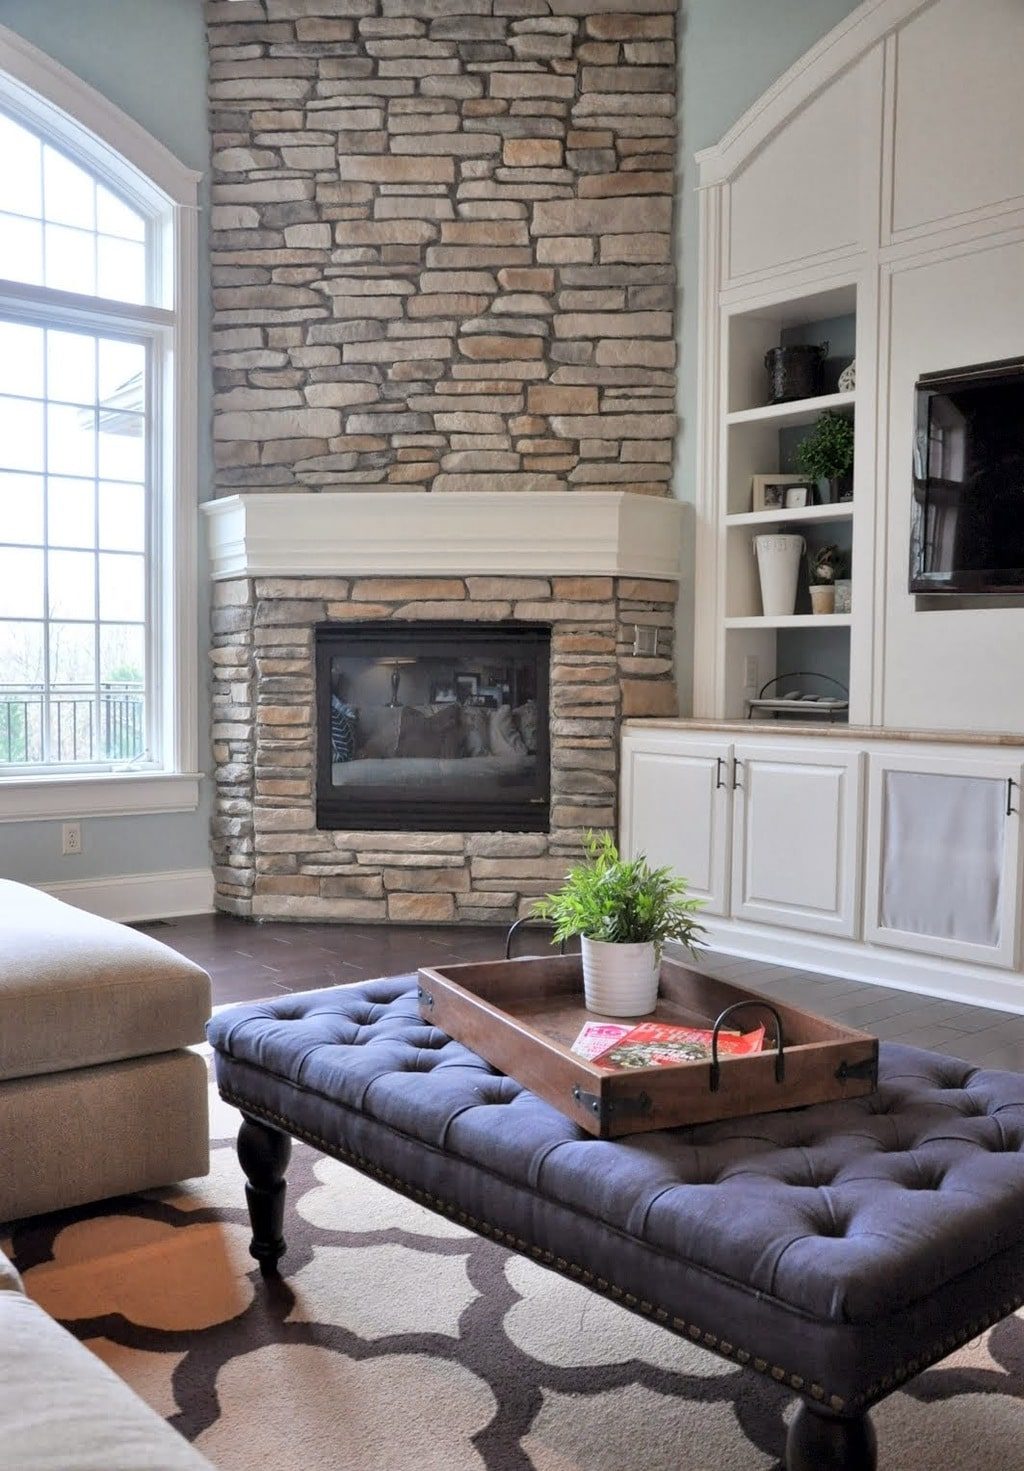 Warm and Rustic: Stone Fireplace Makeover